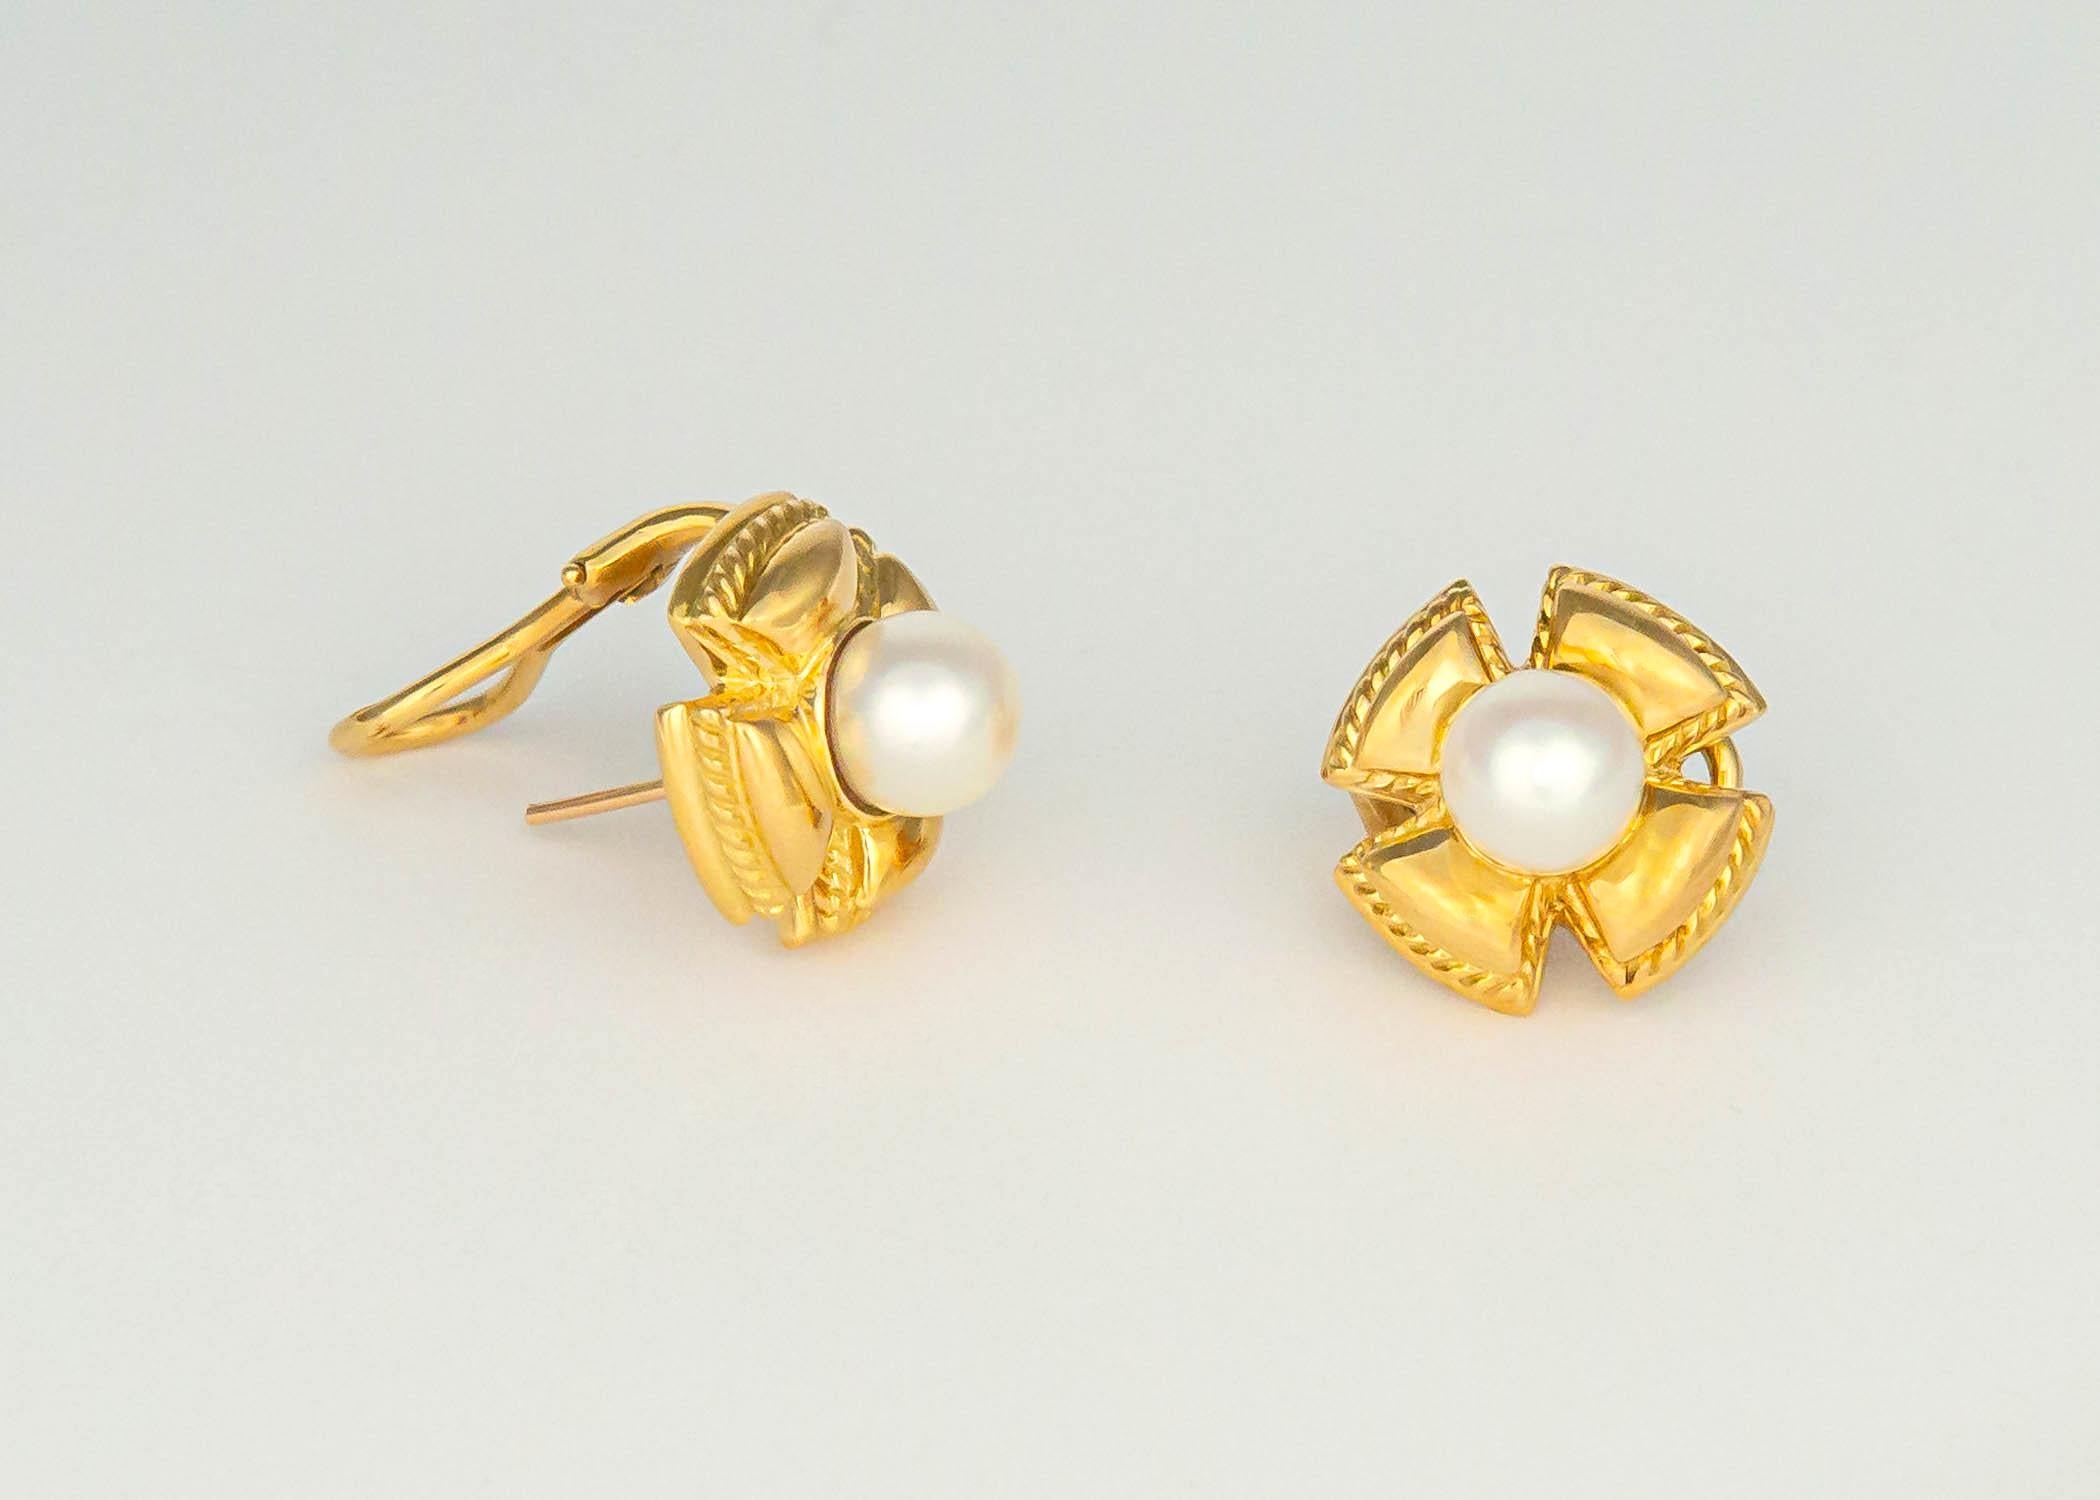 This iconic Schlumberger design features 7.5mm cultured pearls. If your looking for an all the time gold or pearl earring this is the perfect choice. At just 5/8th's of an inch it is ideal for everyday wear. 